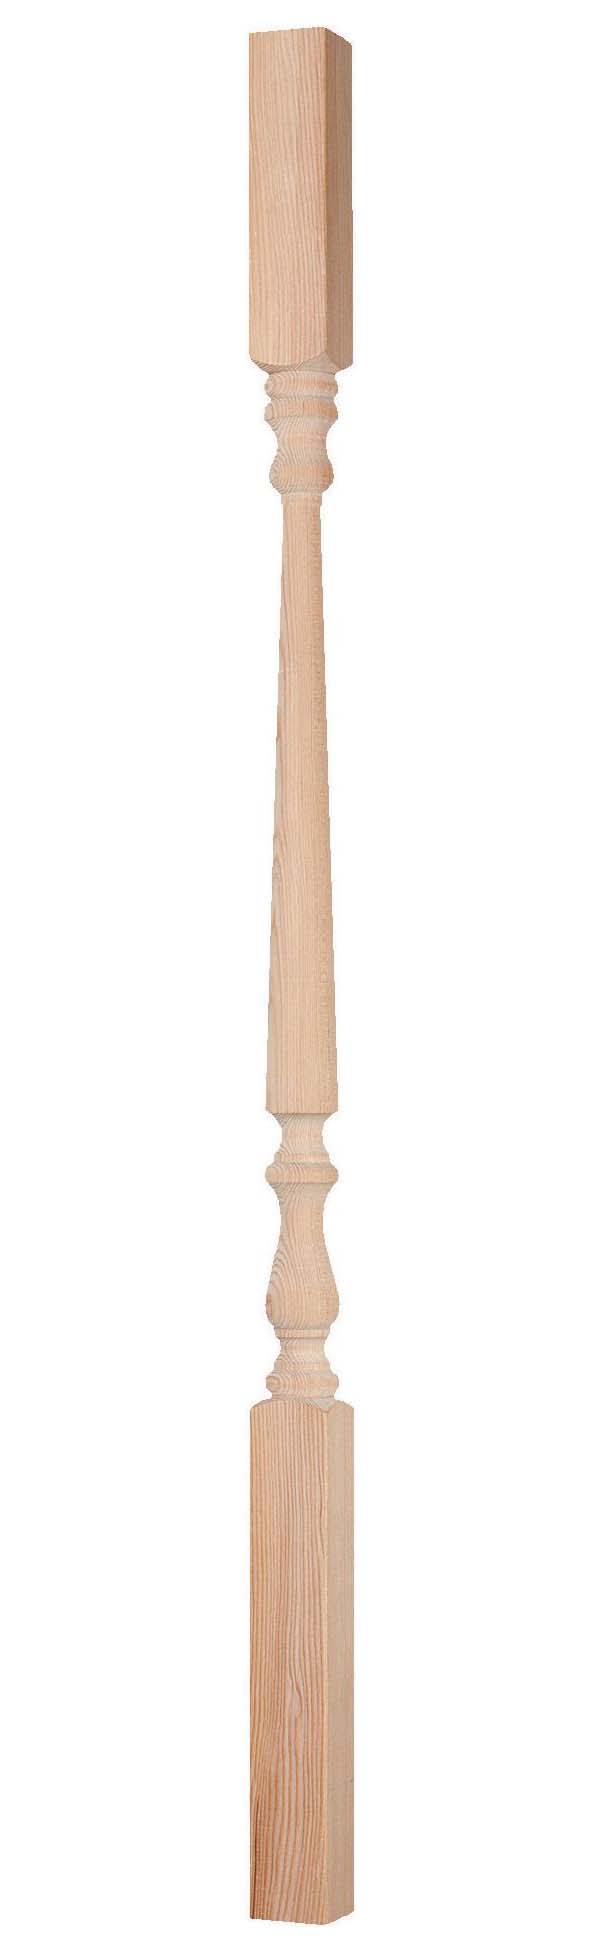 Traditional Hemlock Spindle 41 x 900mm